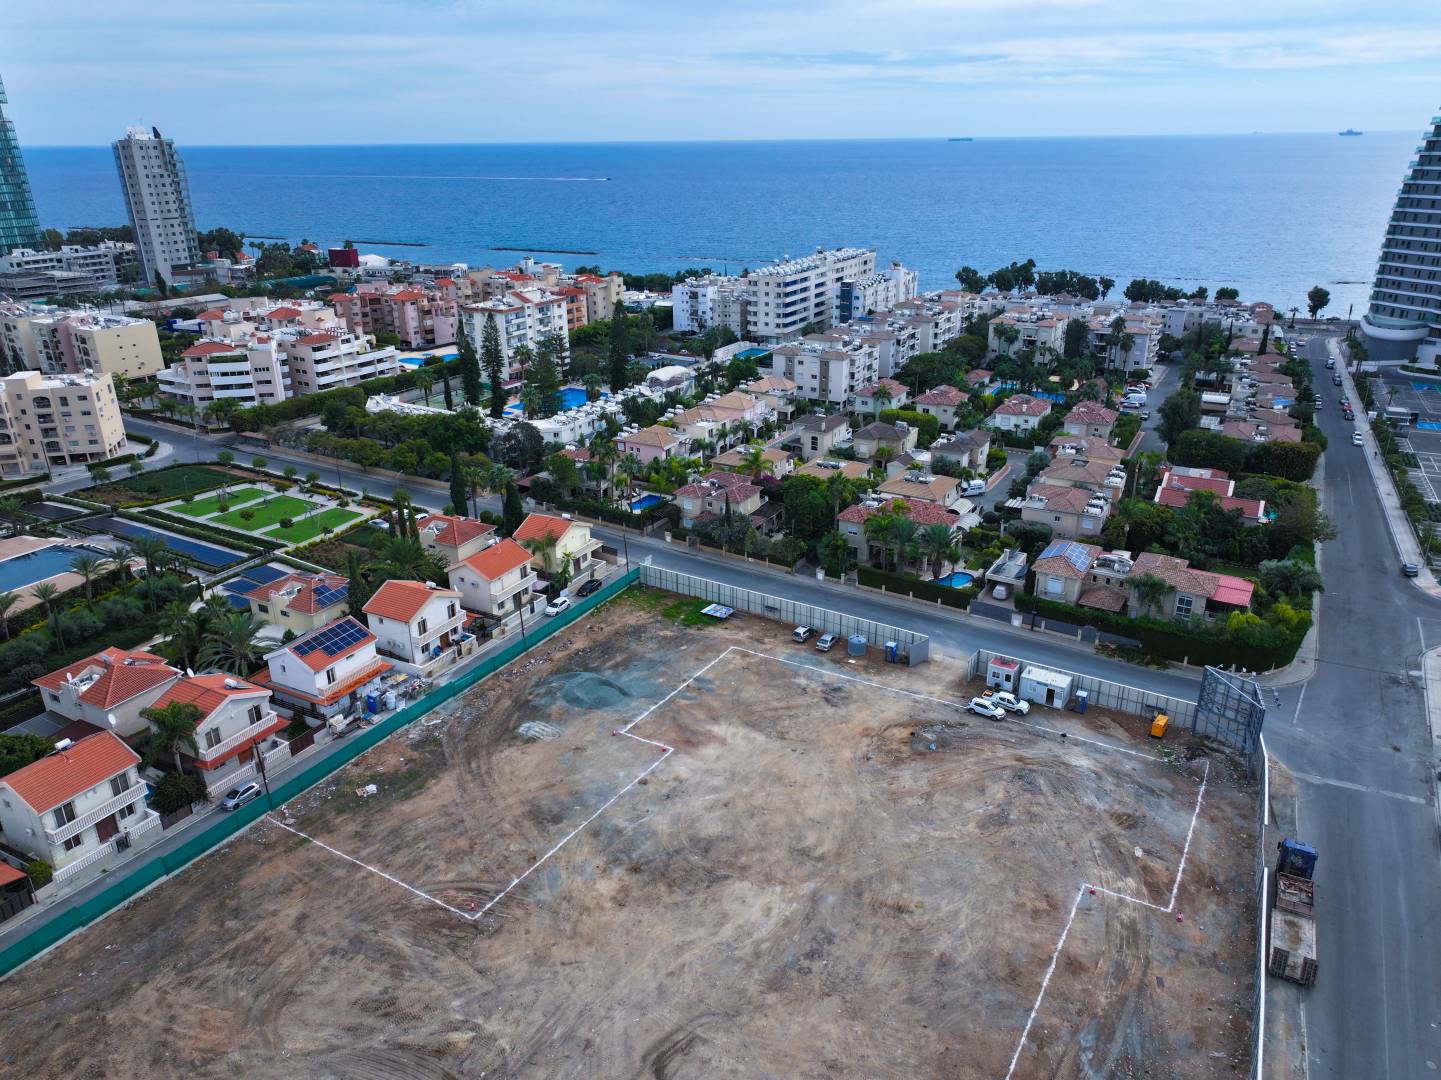 5 Bedroom Apartment for Sale in Mouttagiaka, Limassol District